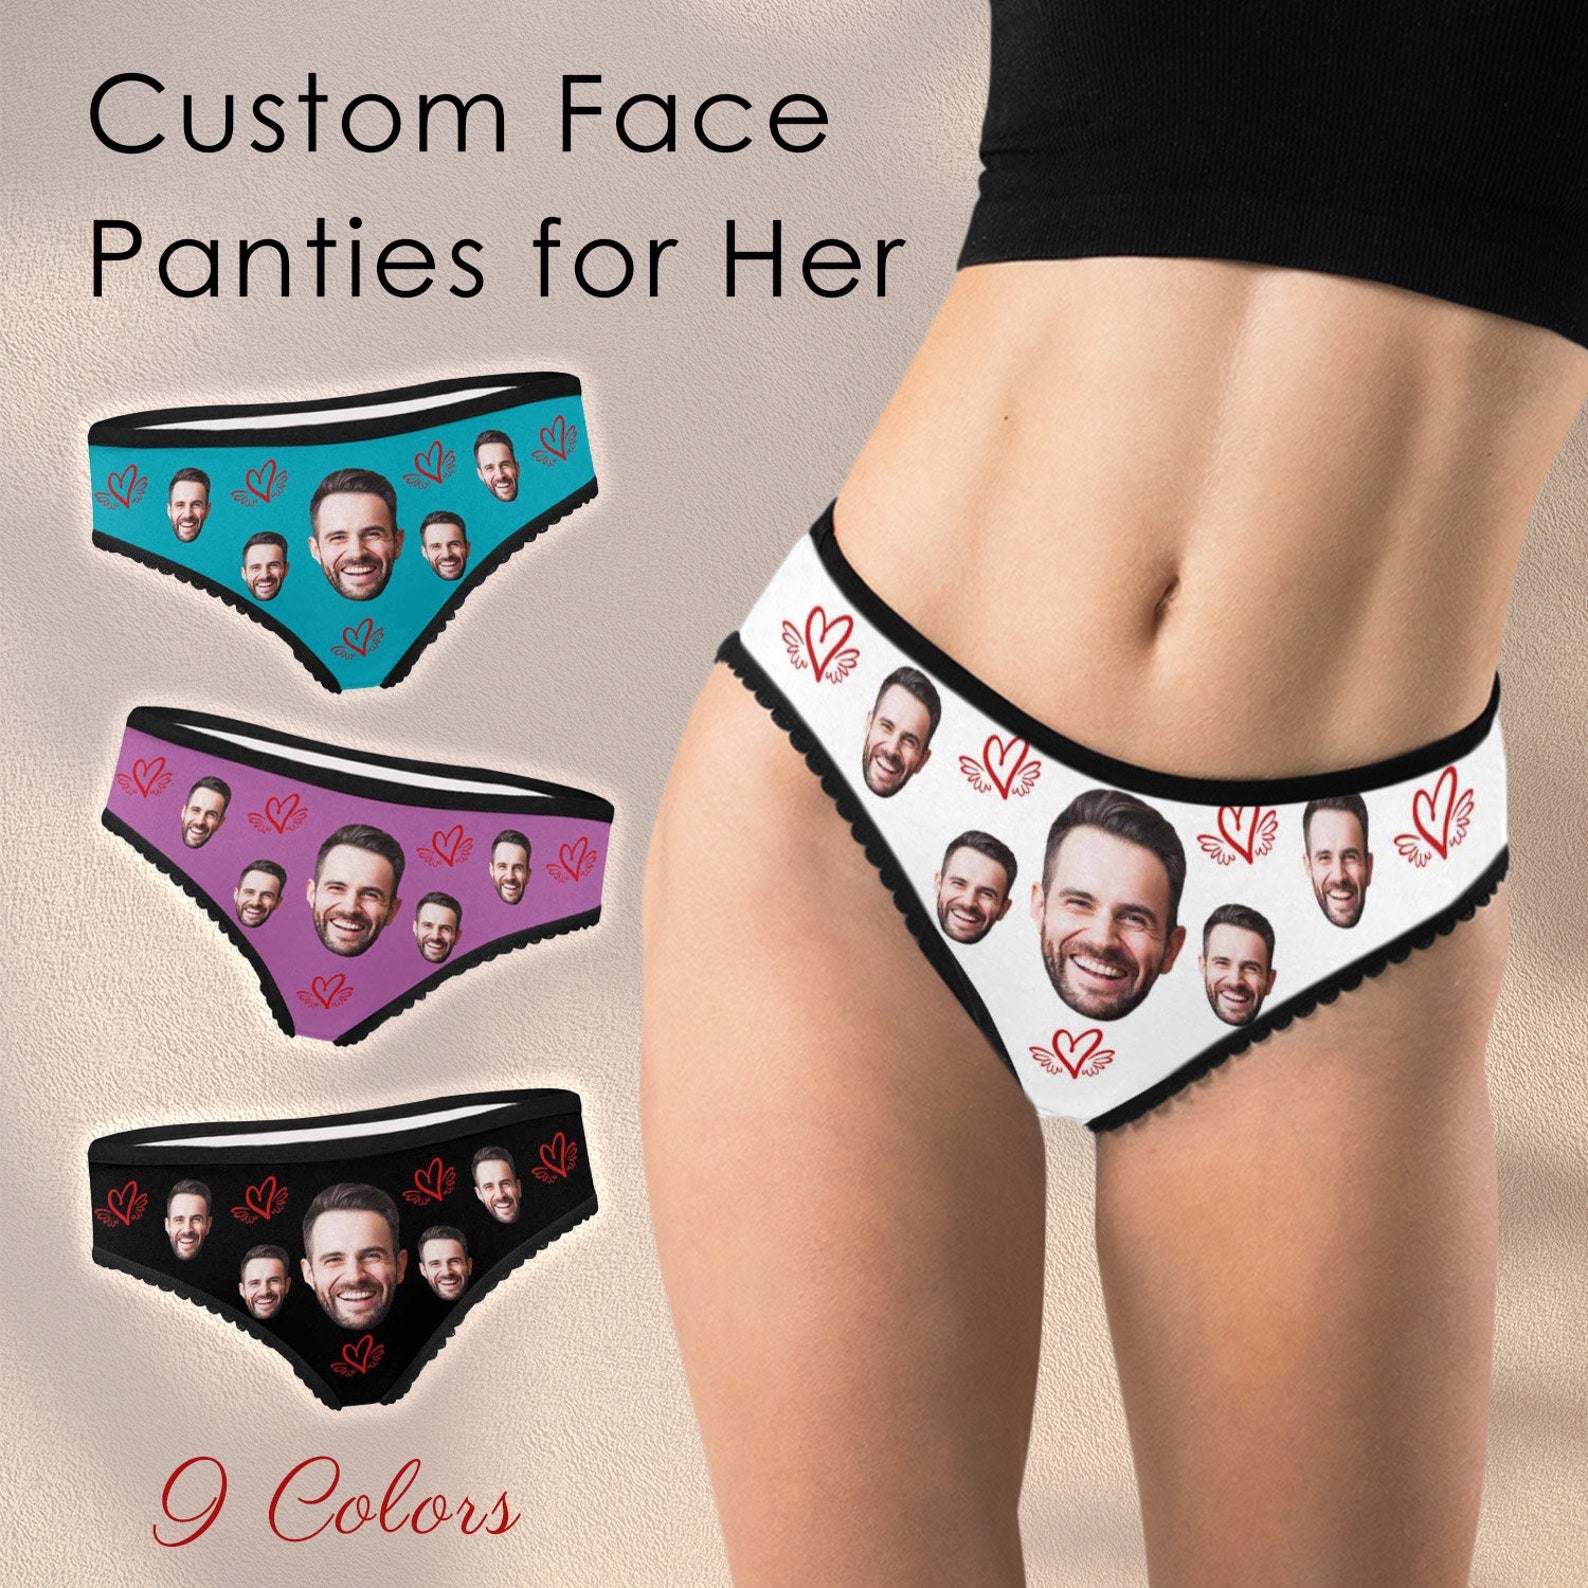 Personalized Women's Briefs with Custom Face Designs